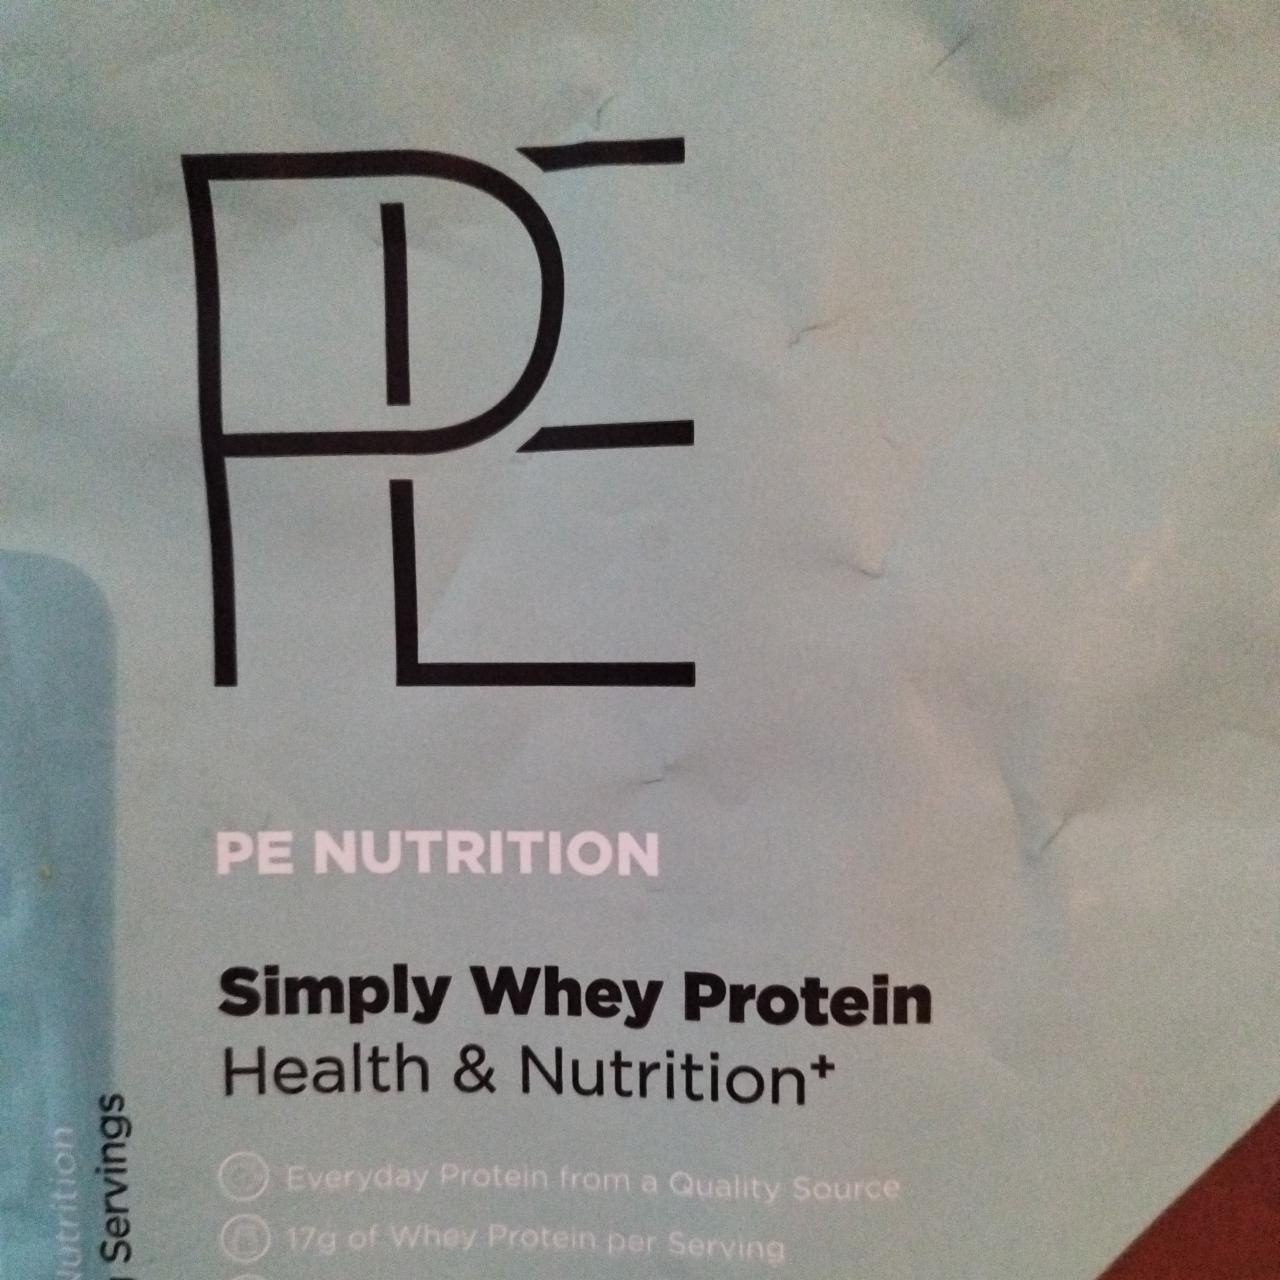 Fotografie - Simply whey protein Chocolate PE Nutrition